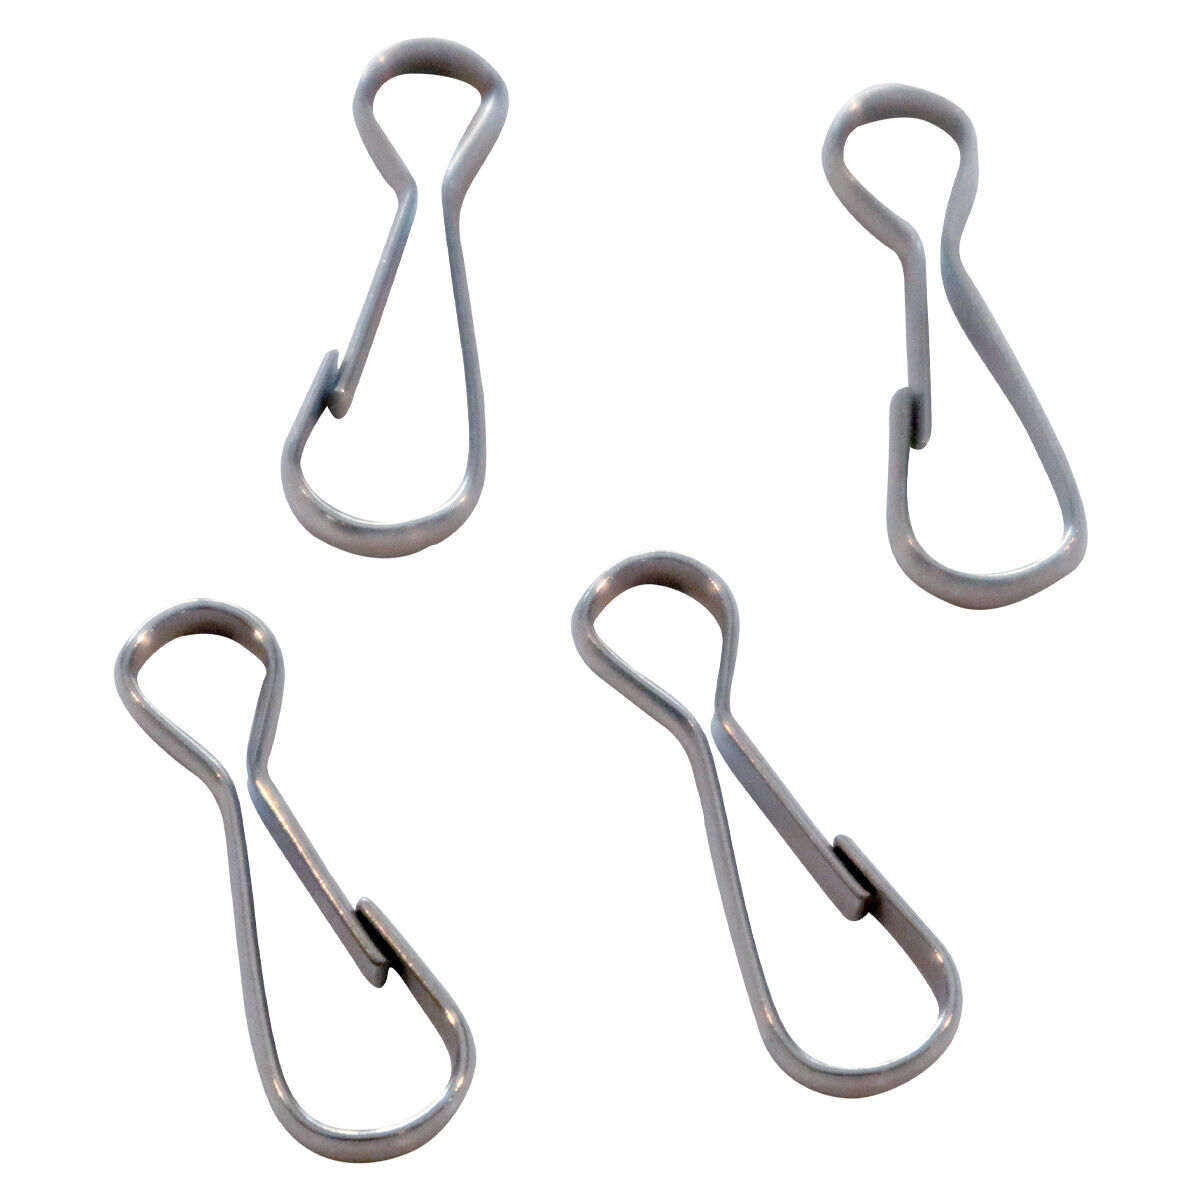 10 Small Metal J Hook Spring Clips for DIY Lanyards & Keychains - 1 1/4 Inch Specialist ID 7743-1020